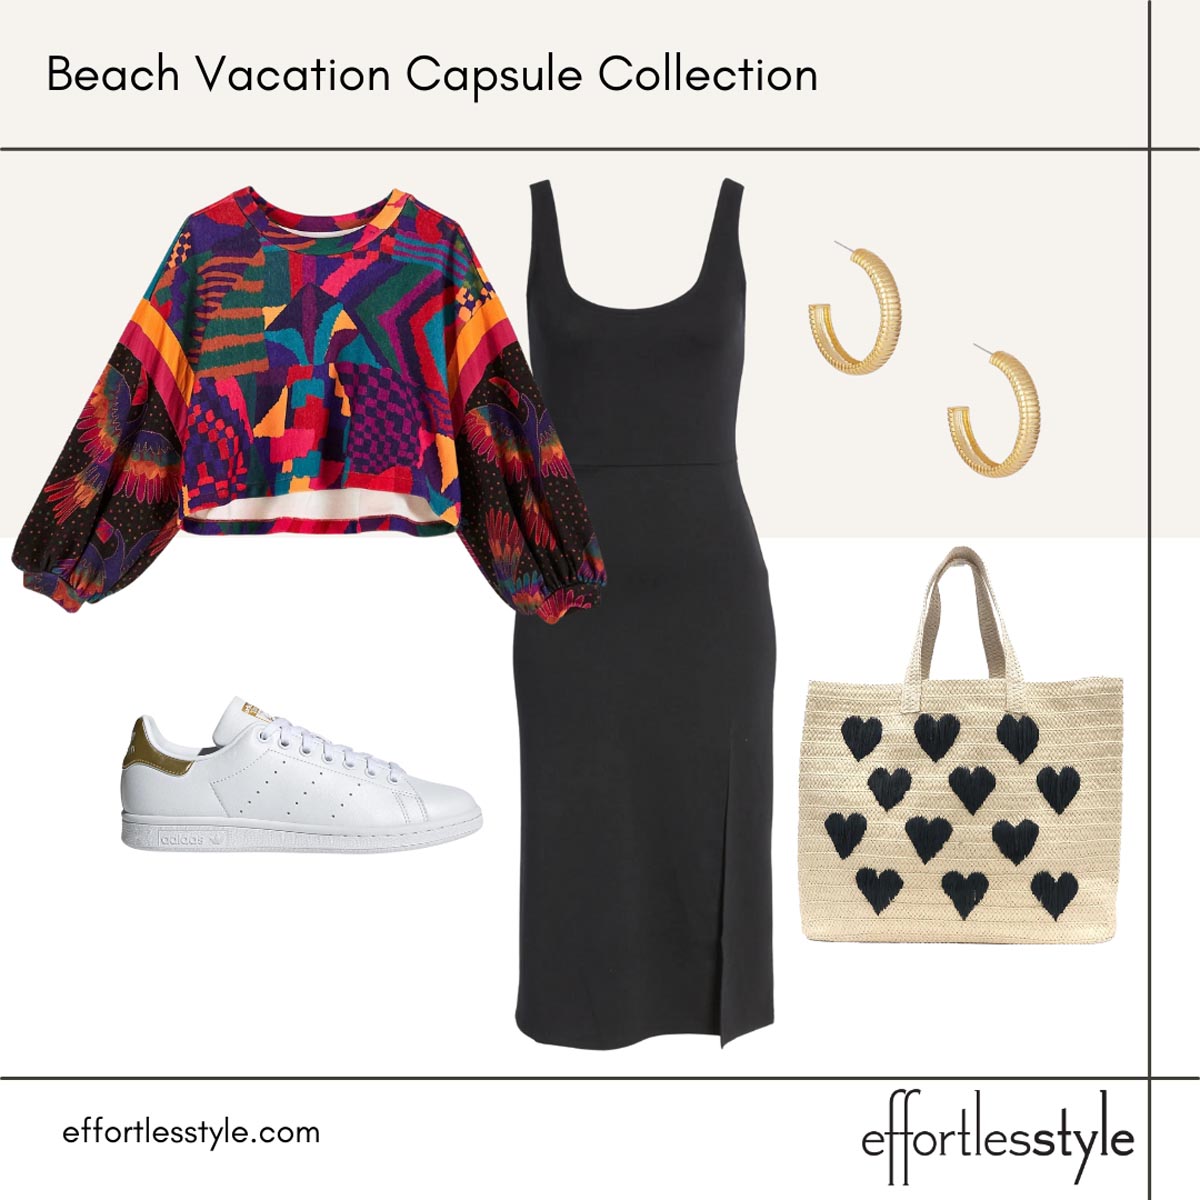 Beach vacation capsule styled looks patterned sweatshirt and dress how to style a sweatshirt with a dress how to wear sneakers with a dress sneakers and midi dress straw tote for the beach